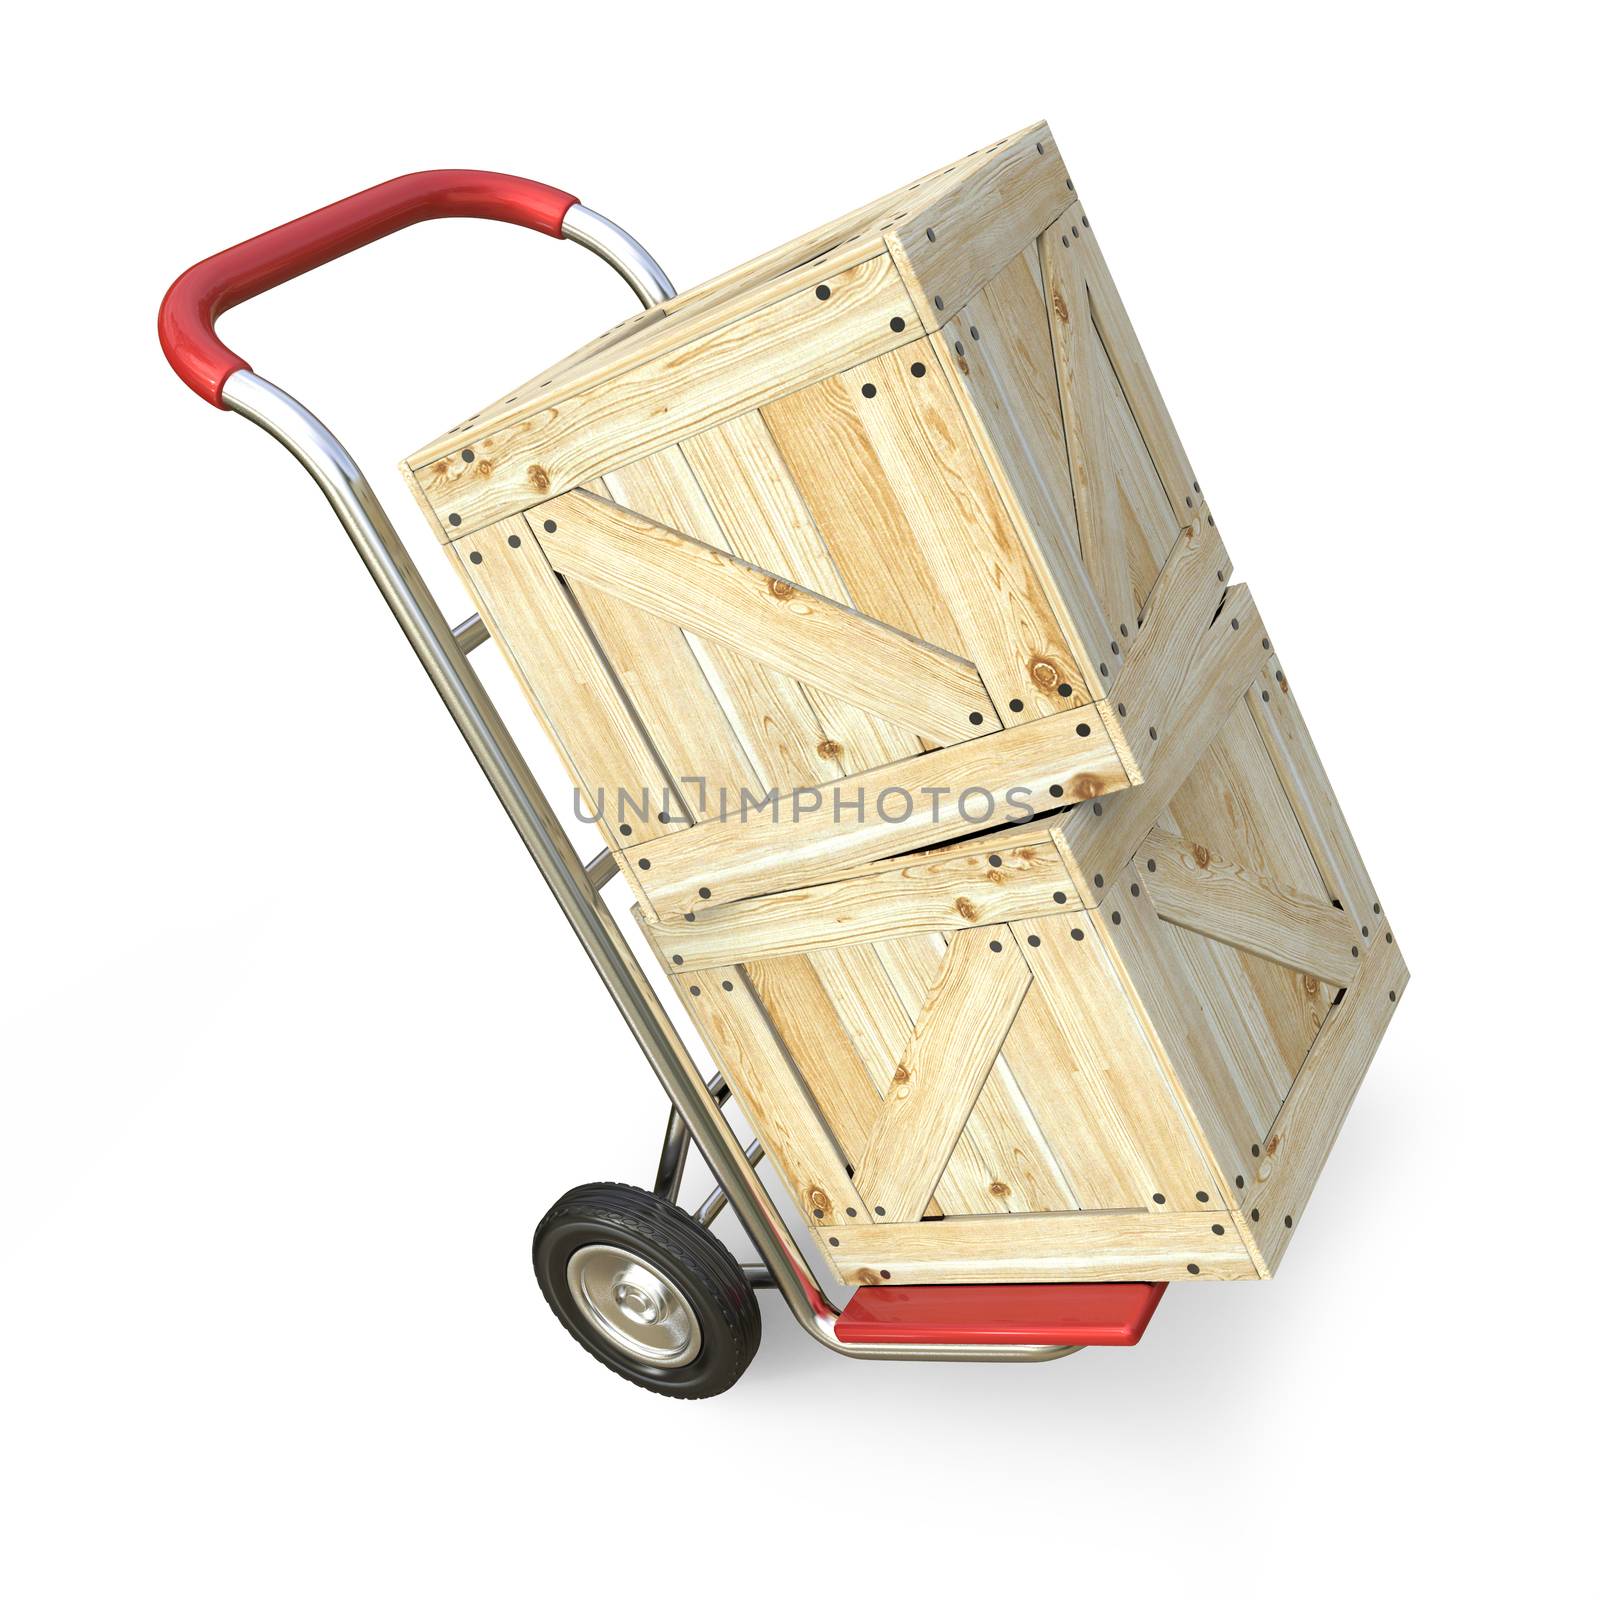 Hand truck with wooden box. Delivery concept. 3D render illustration isolated on white background